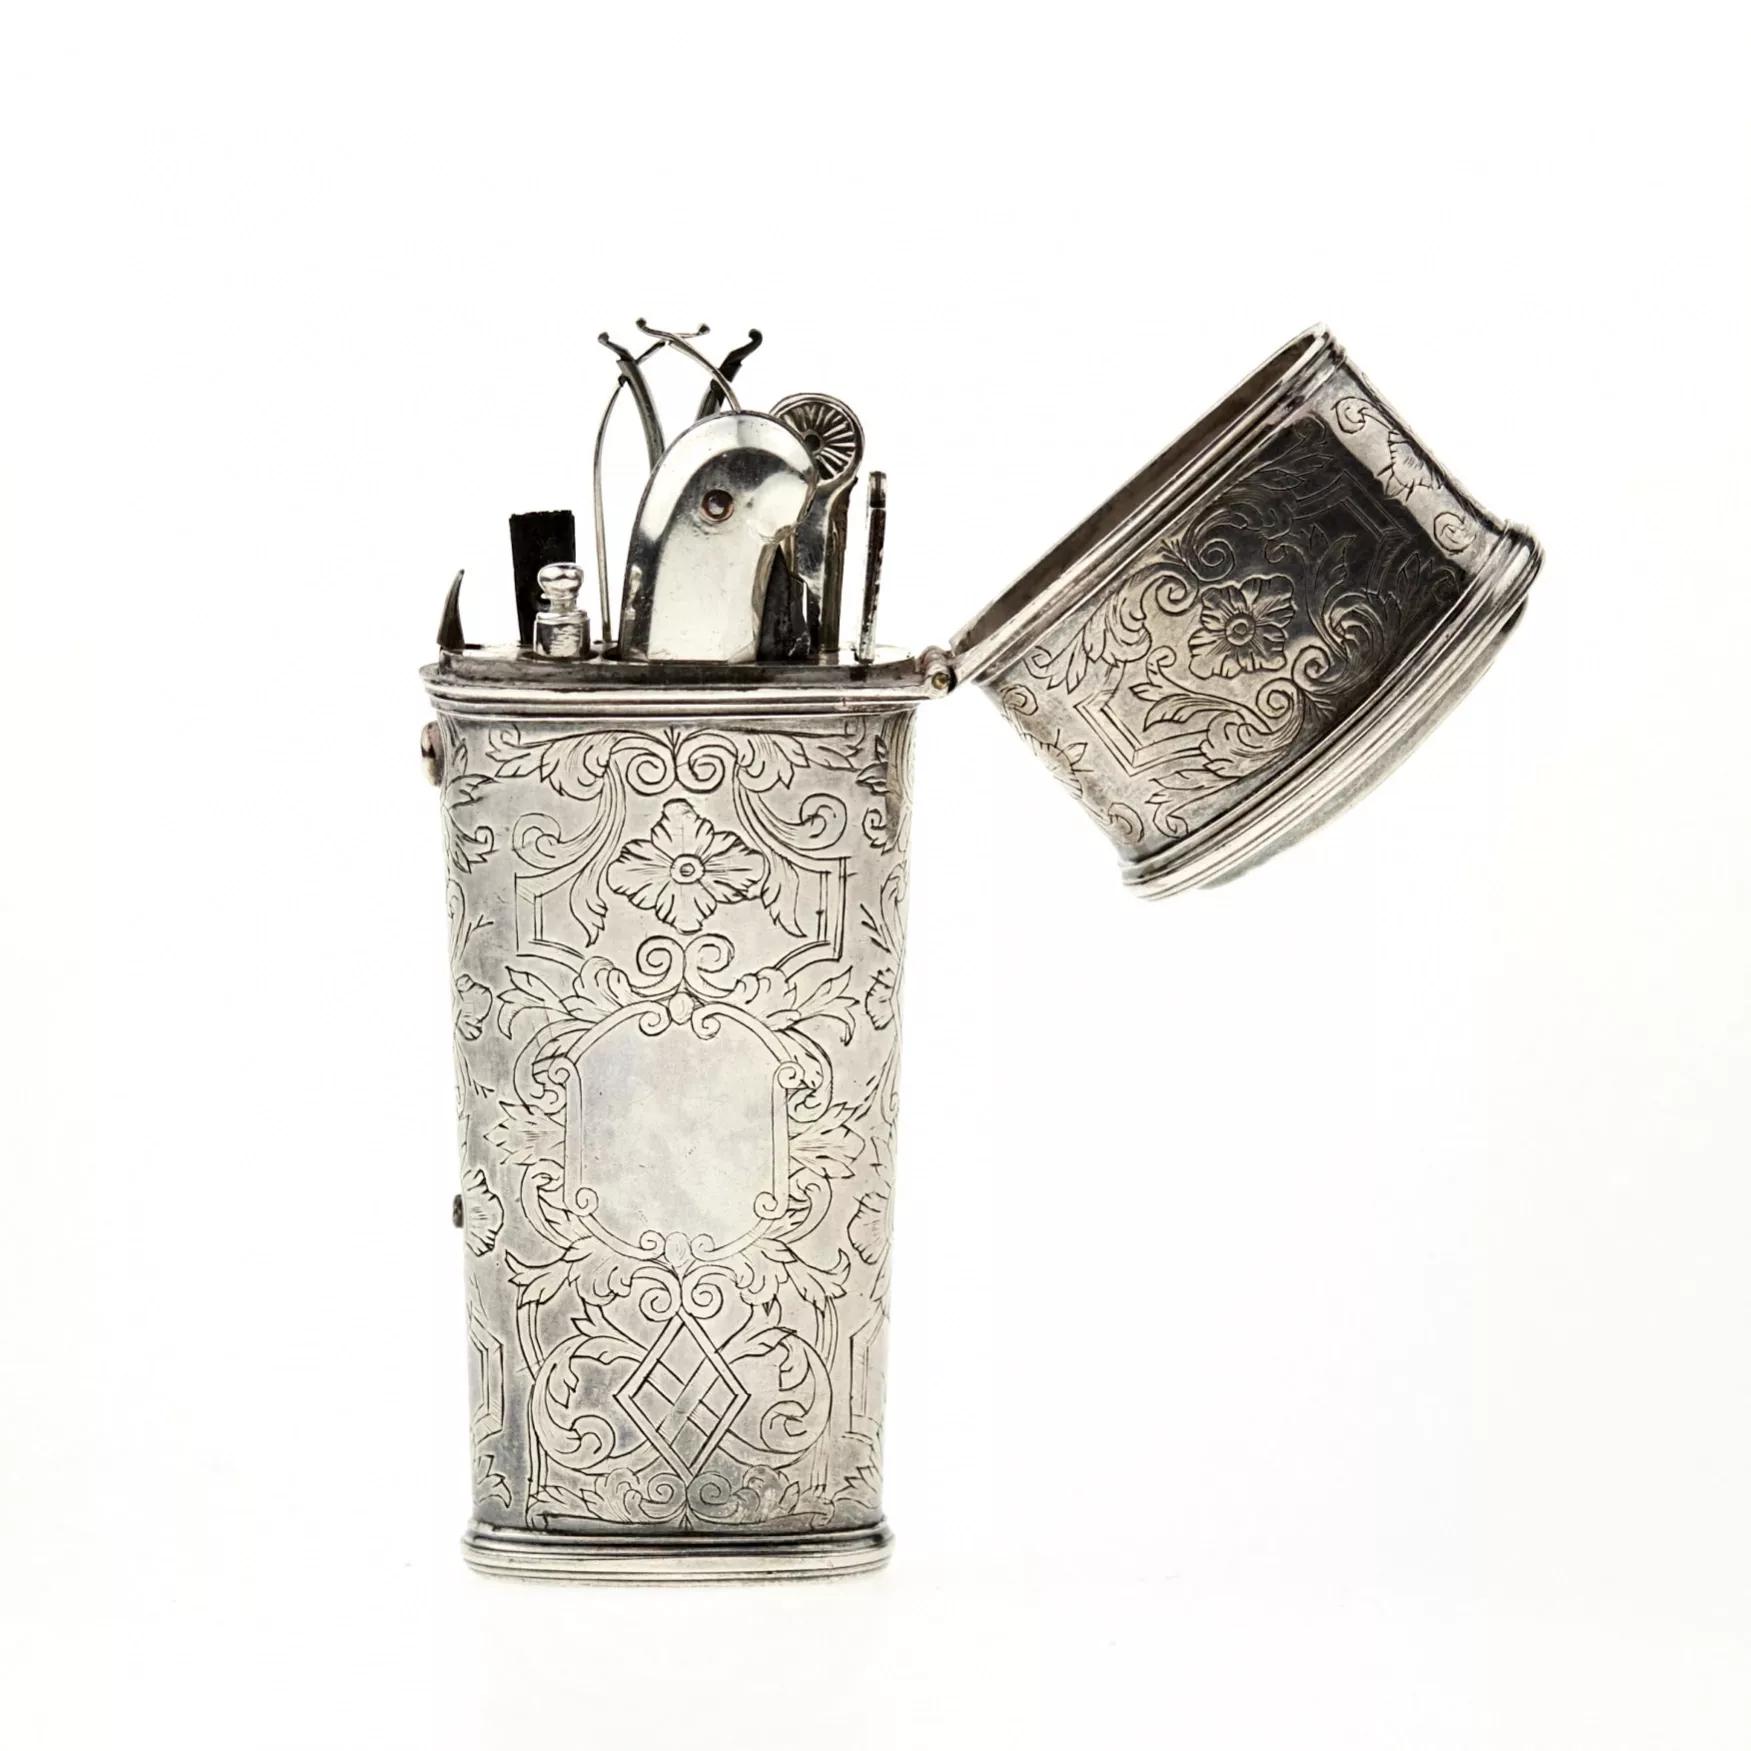 Silver travel necessaire Europe, 18th century. - Image 3 of 4